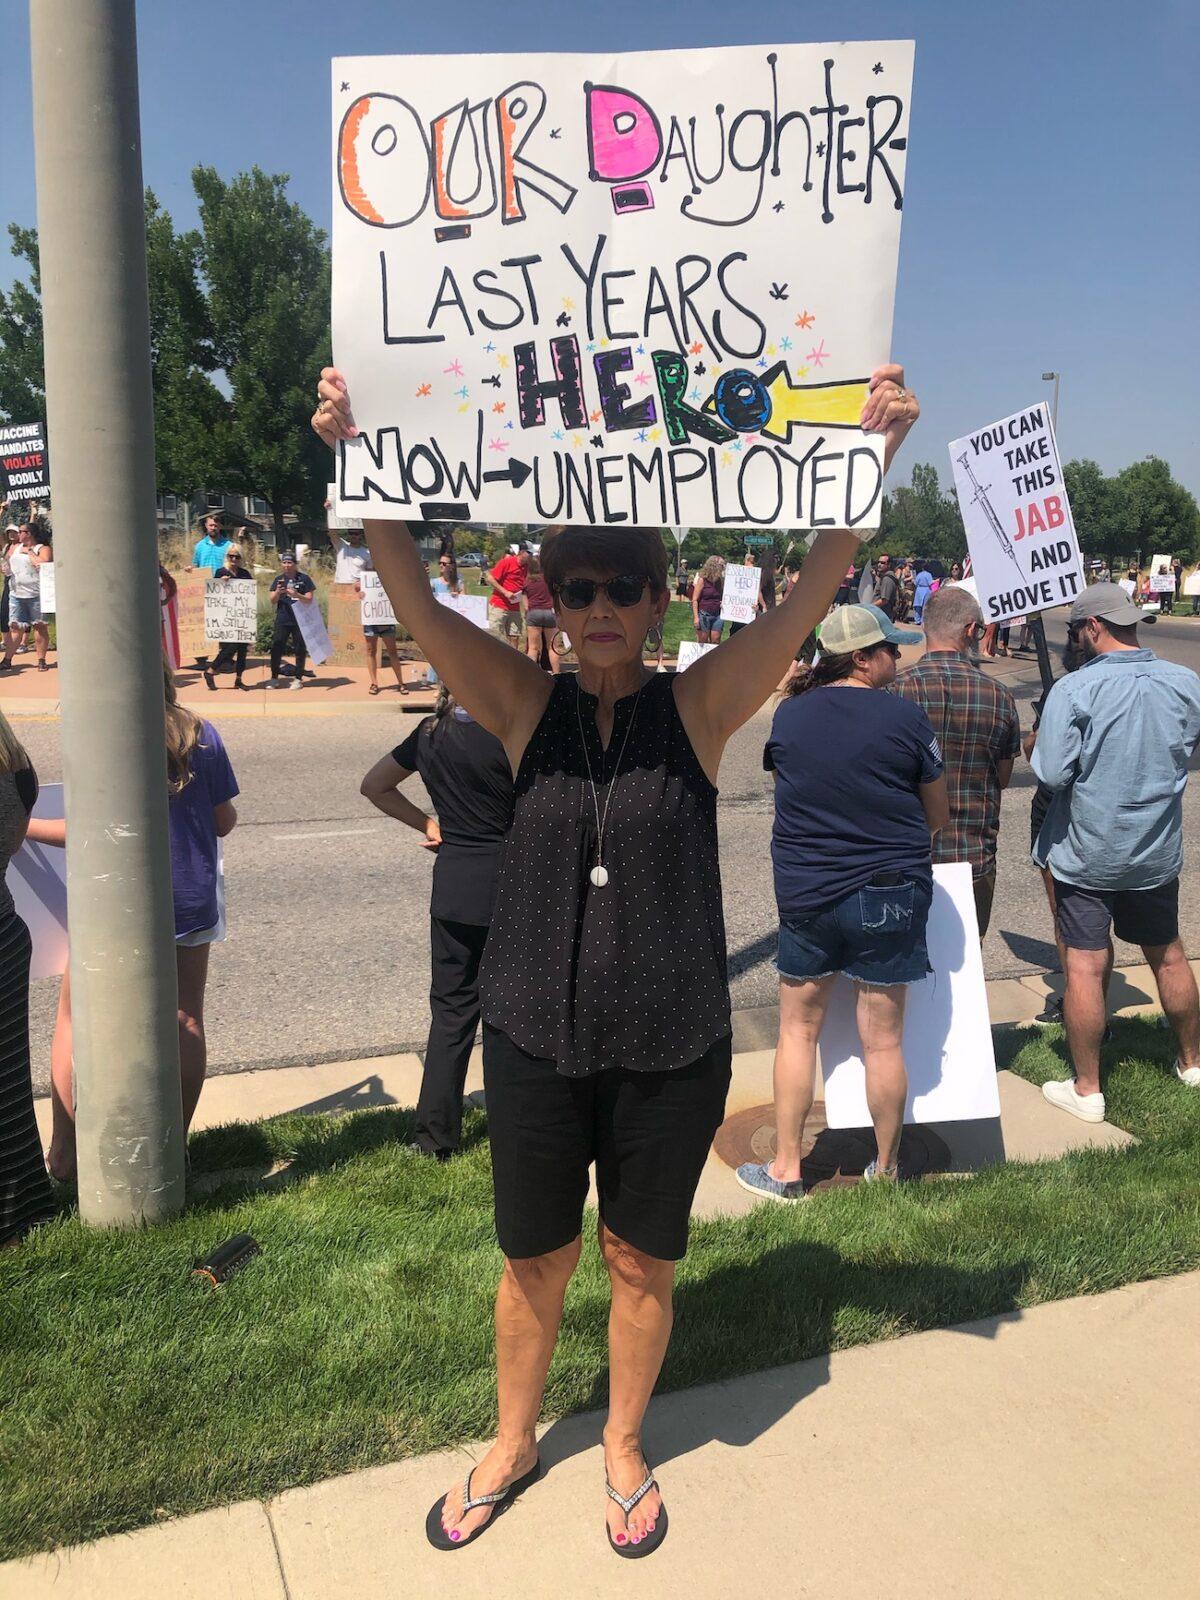 A protester holds a sign expressing the iron of yesterday's front-line heroes becoming today's unemployed healthcare workers because of their opposition to mandated COVID-19 vaccines in Loveland, Colo., on Aug. 13, 2021. (Allan Stein/The Epoch Times)